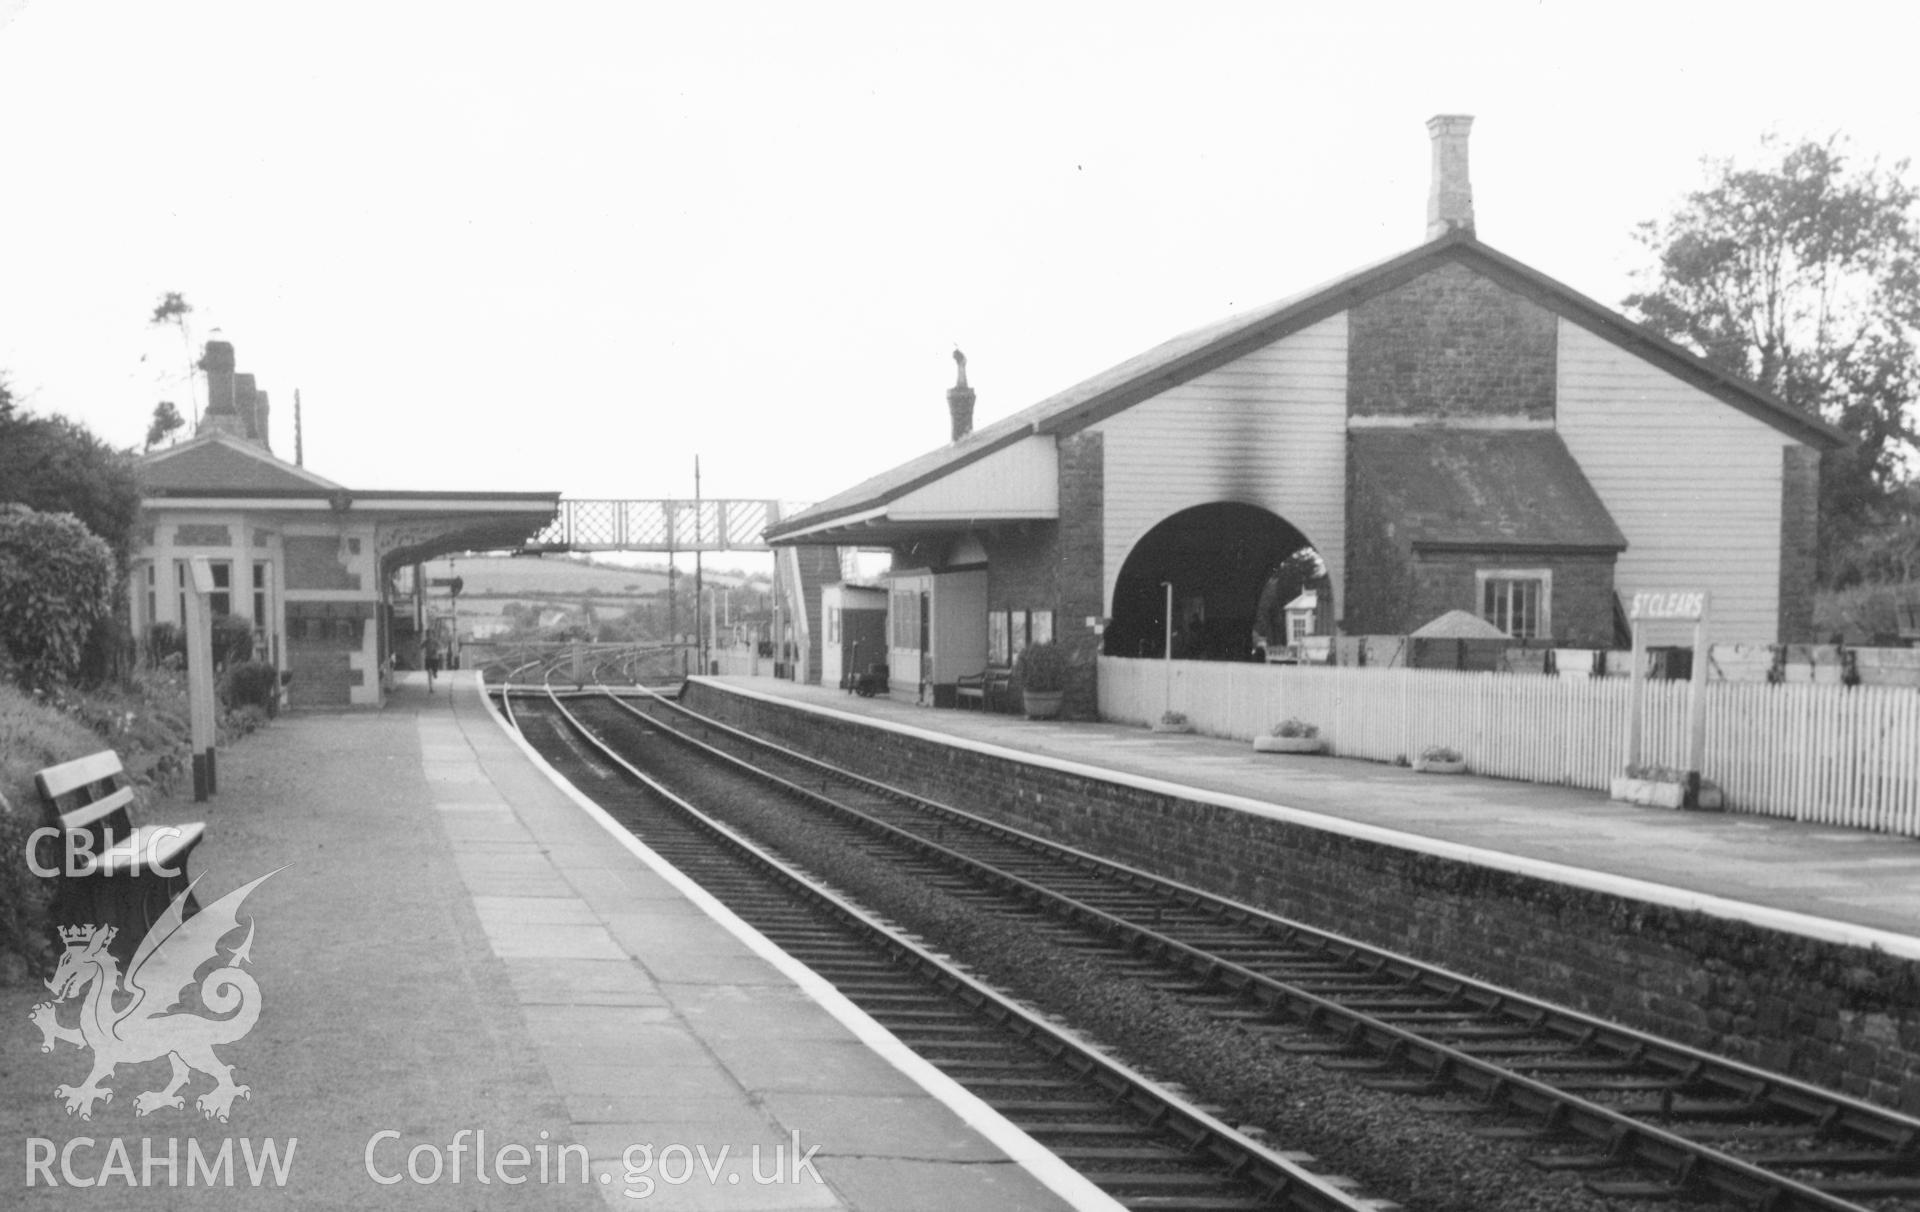 Black and white postcard showing general view of St Clears Railway Station, from the Rokeby Collection Album Vol III, 28b